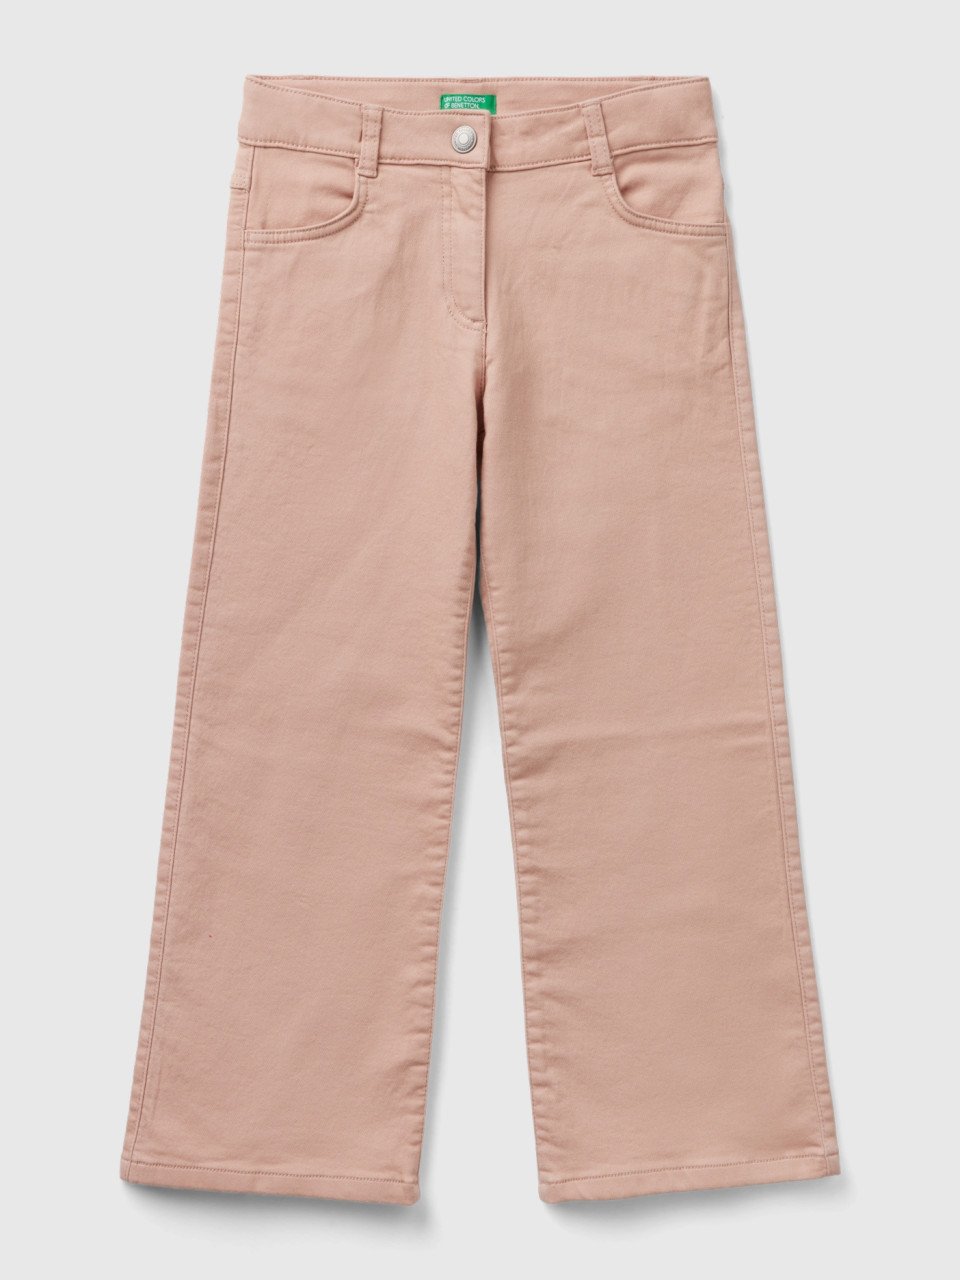 Benetton, Flared Stretch Pants, Soft Pink, Kids